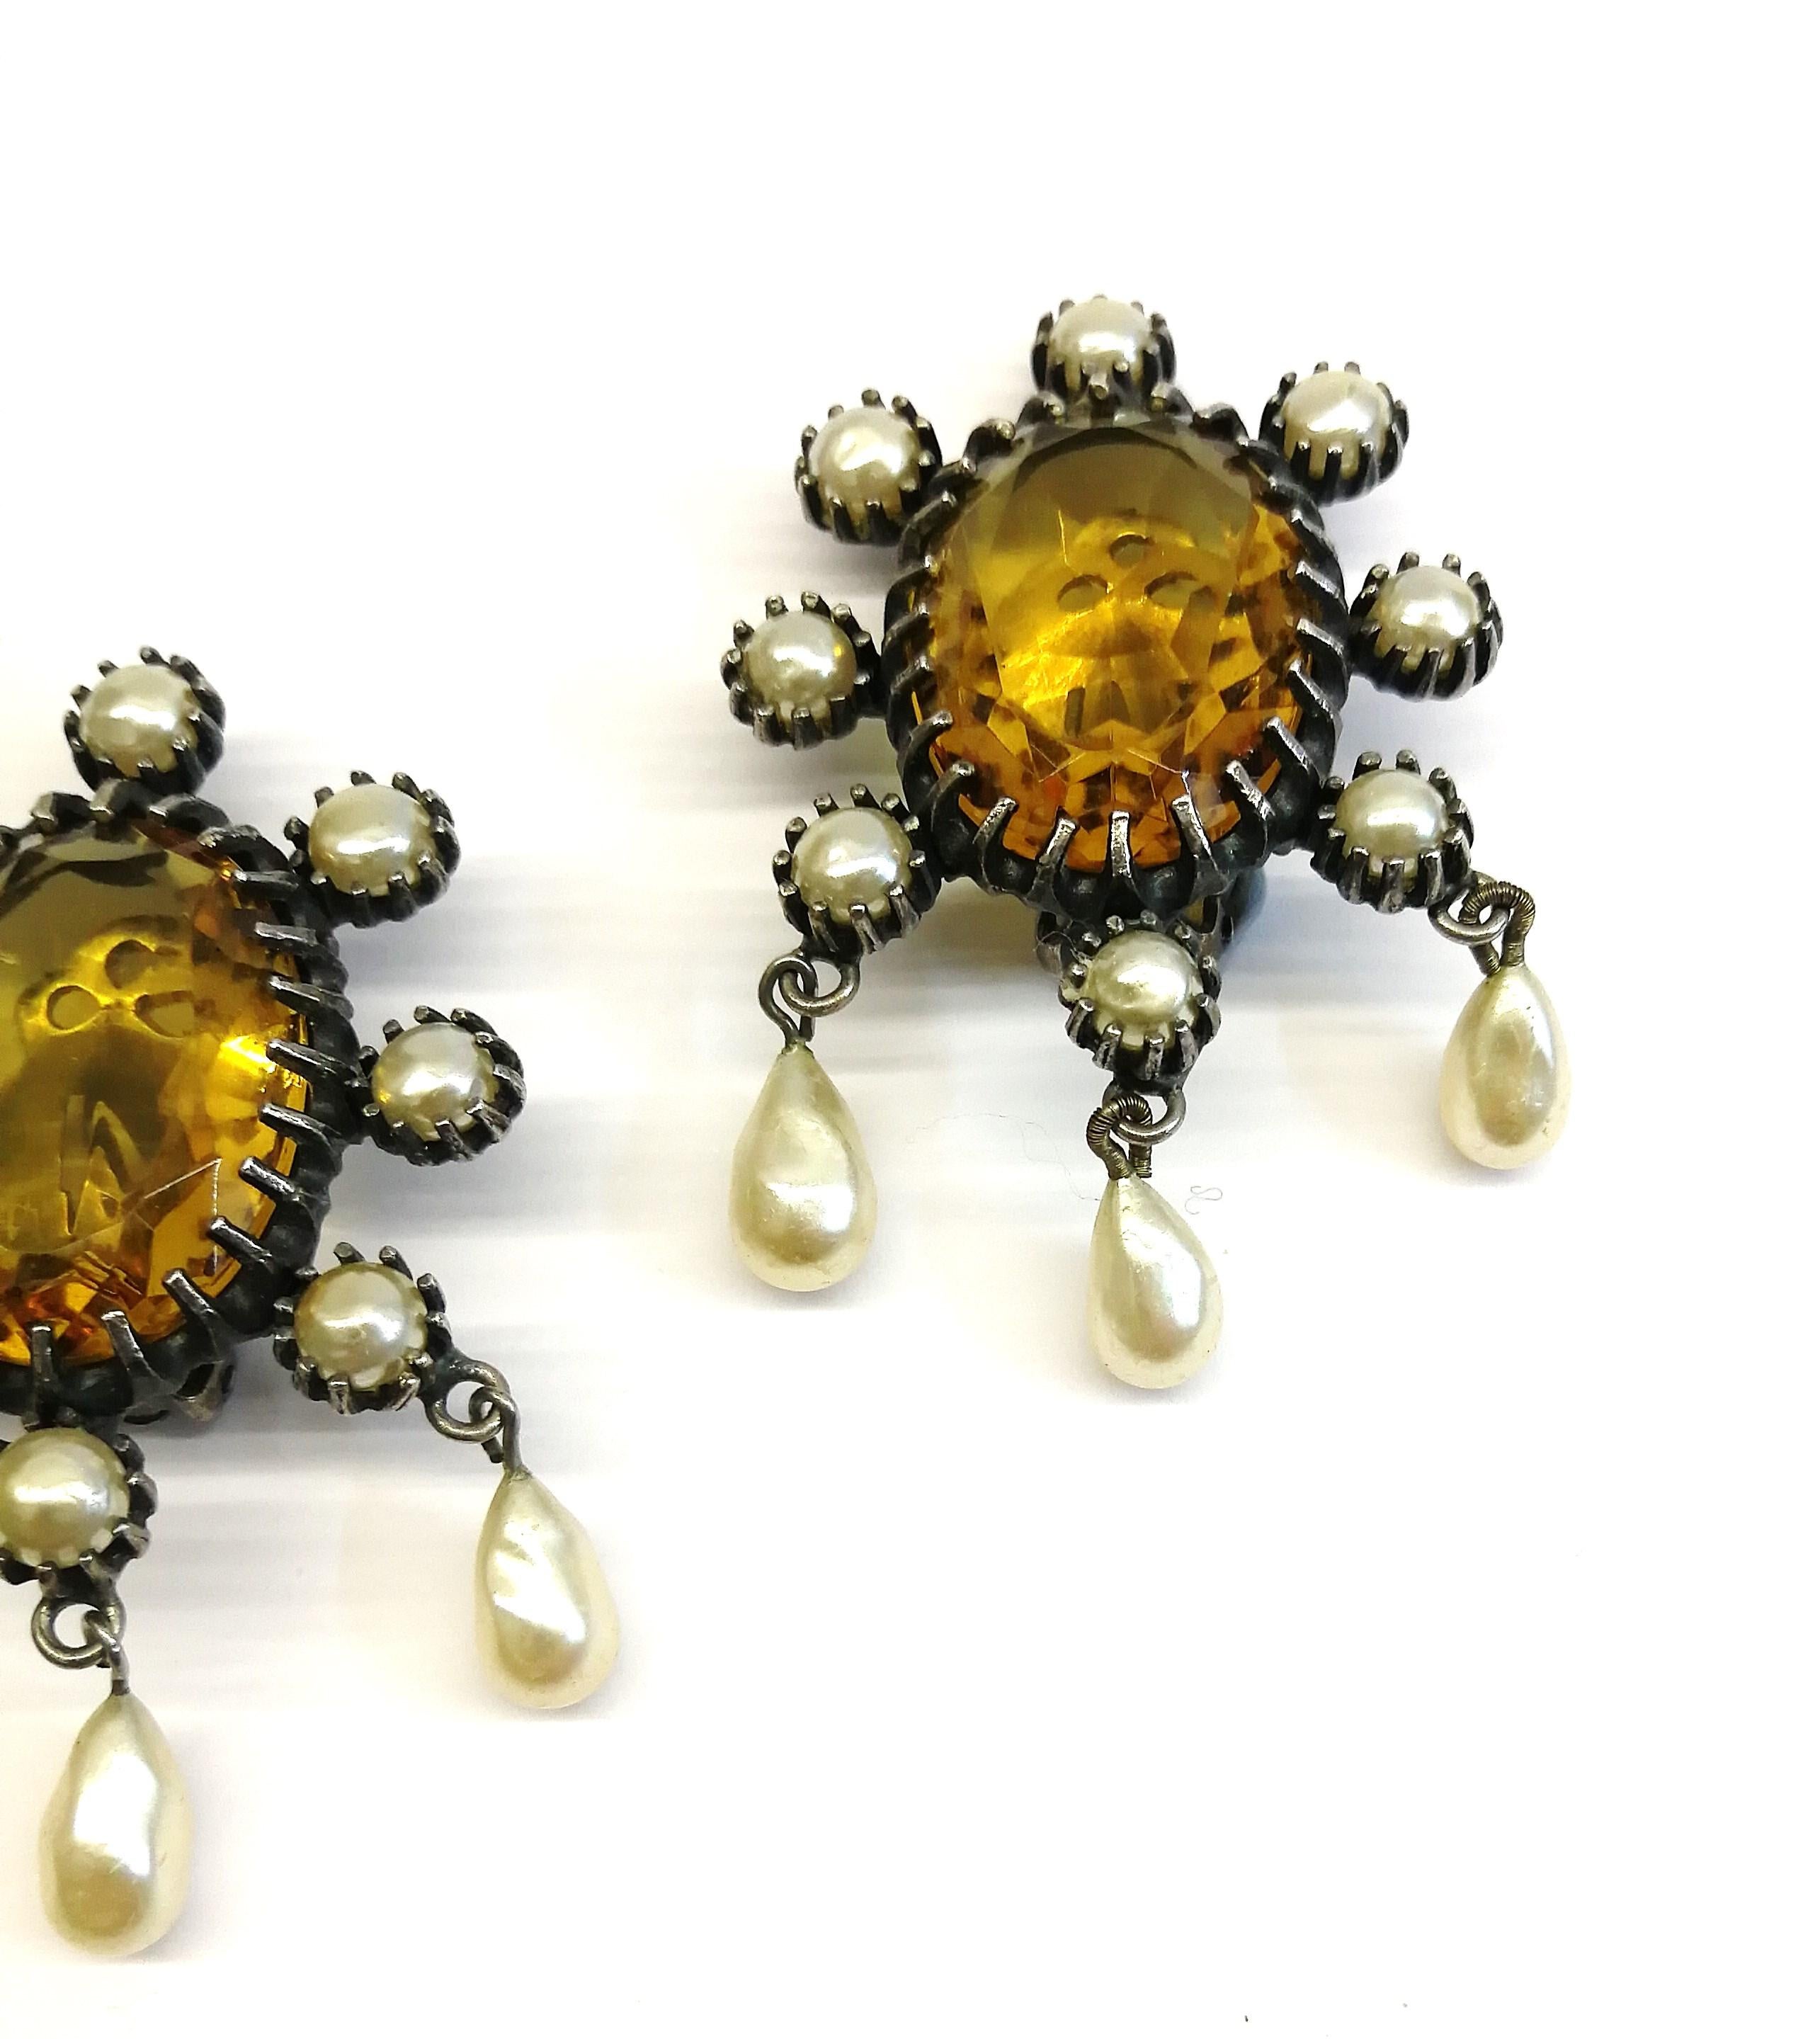 Large smokey quartz and pearl drop earrings, Mitchel Maer by Christian Dior. 3